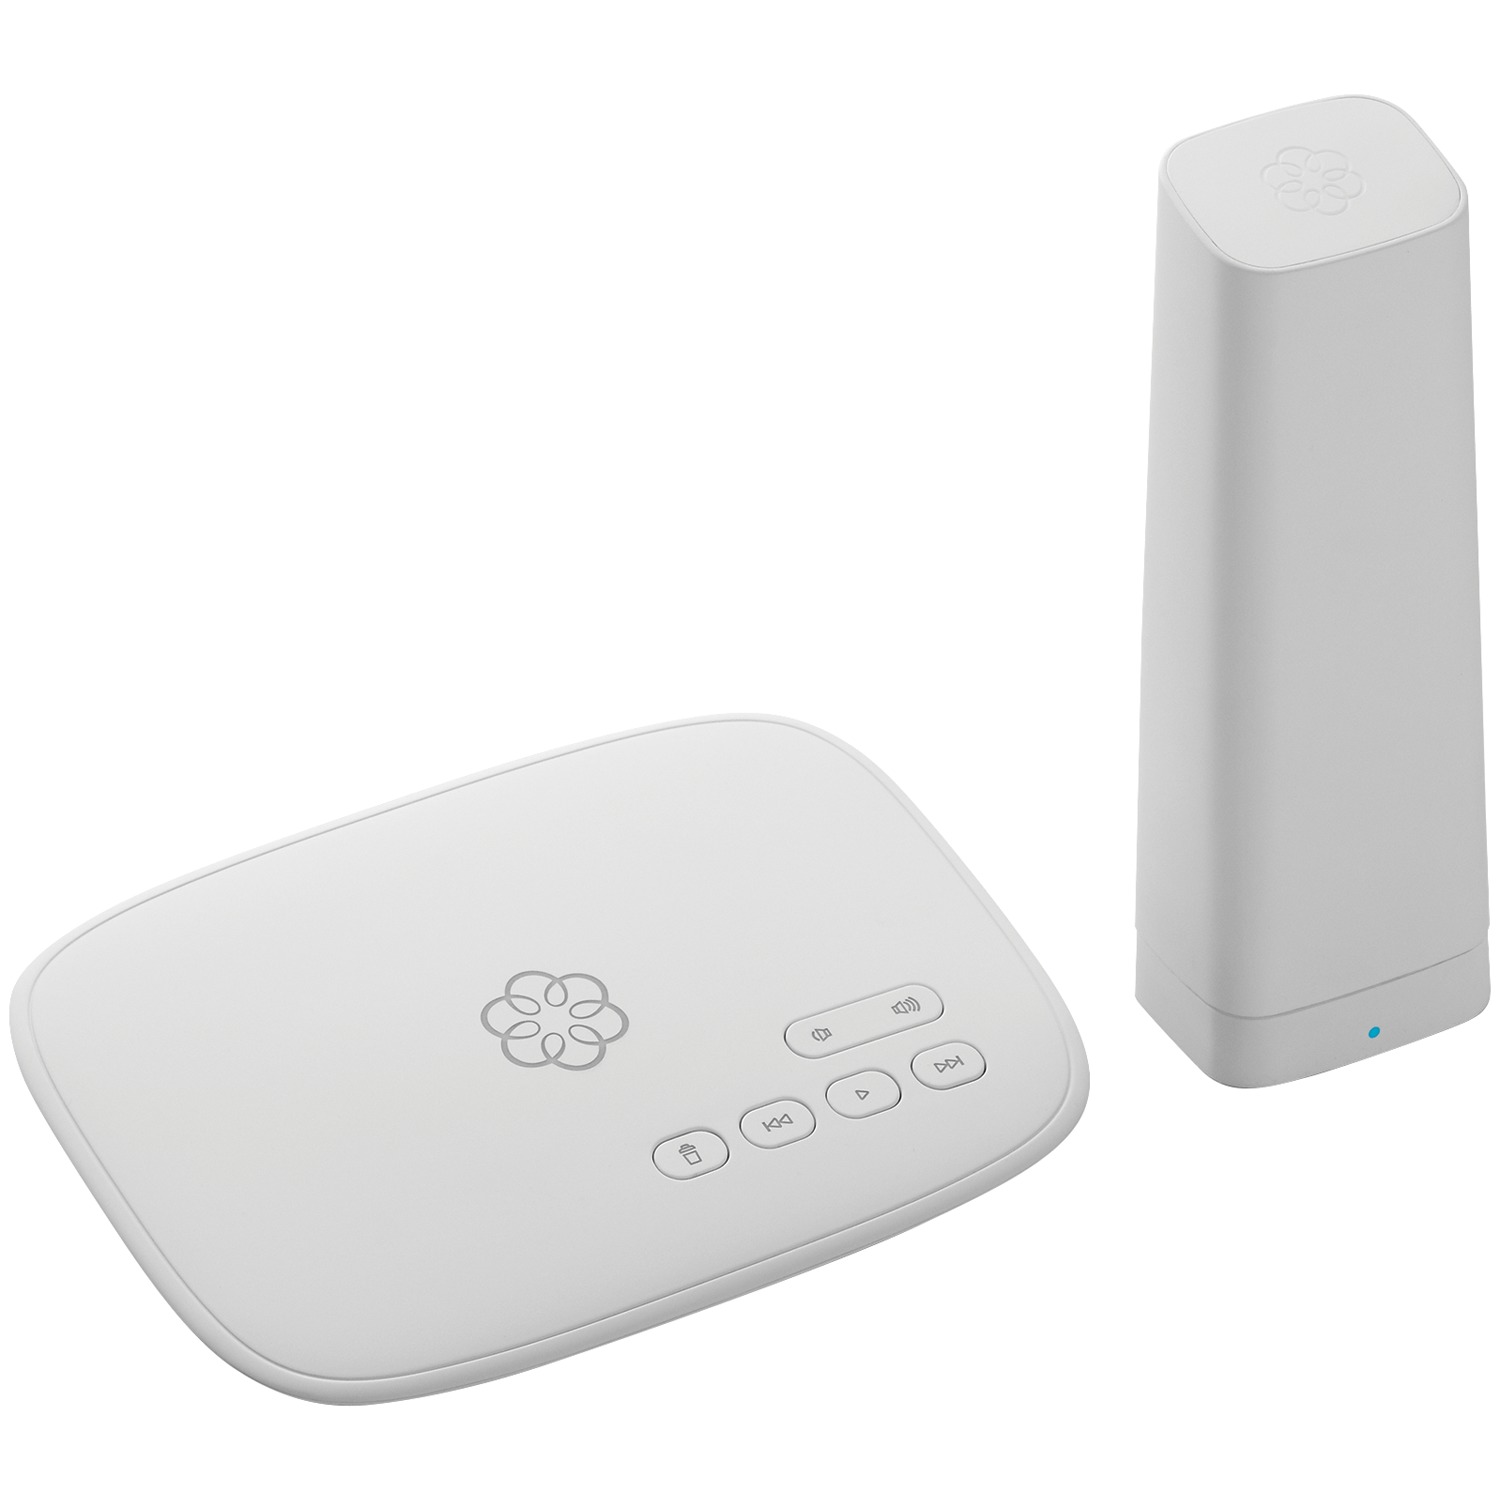 Ooma Phone Genie LTE, Alternative Home Phone Service with No Internet Connection Required - image 1 of 4